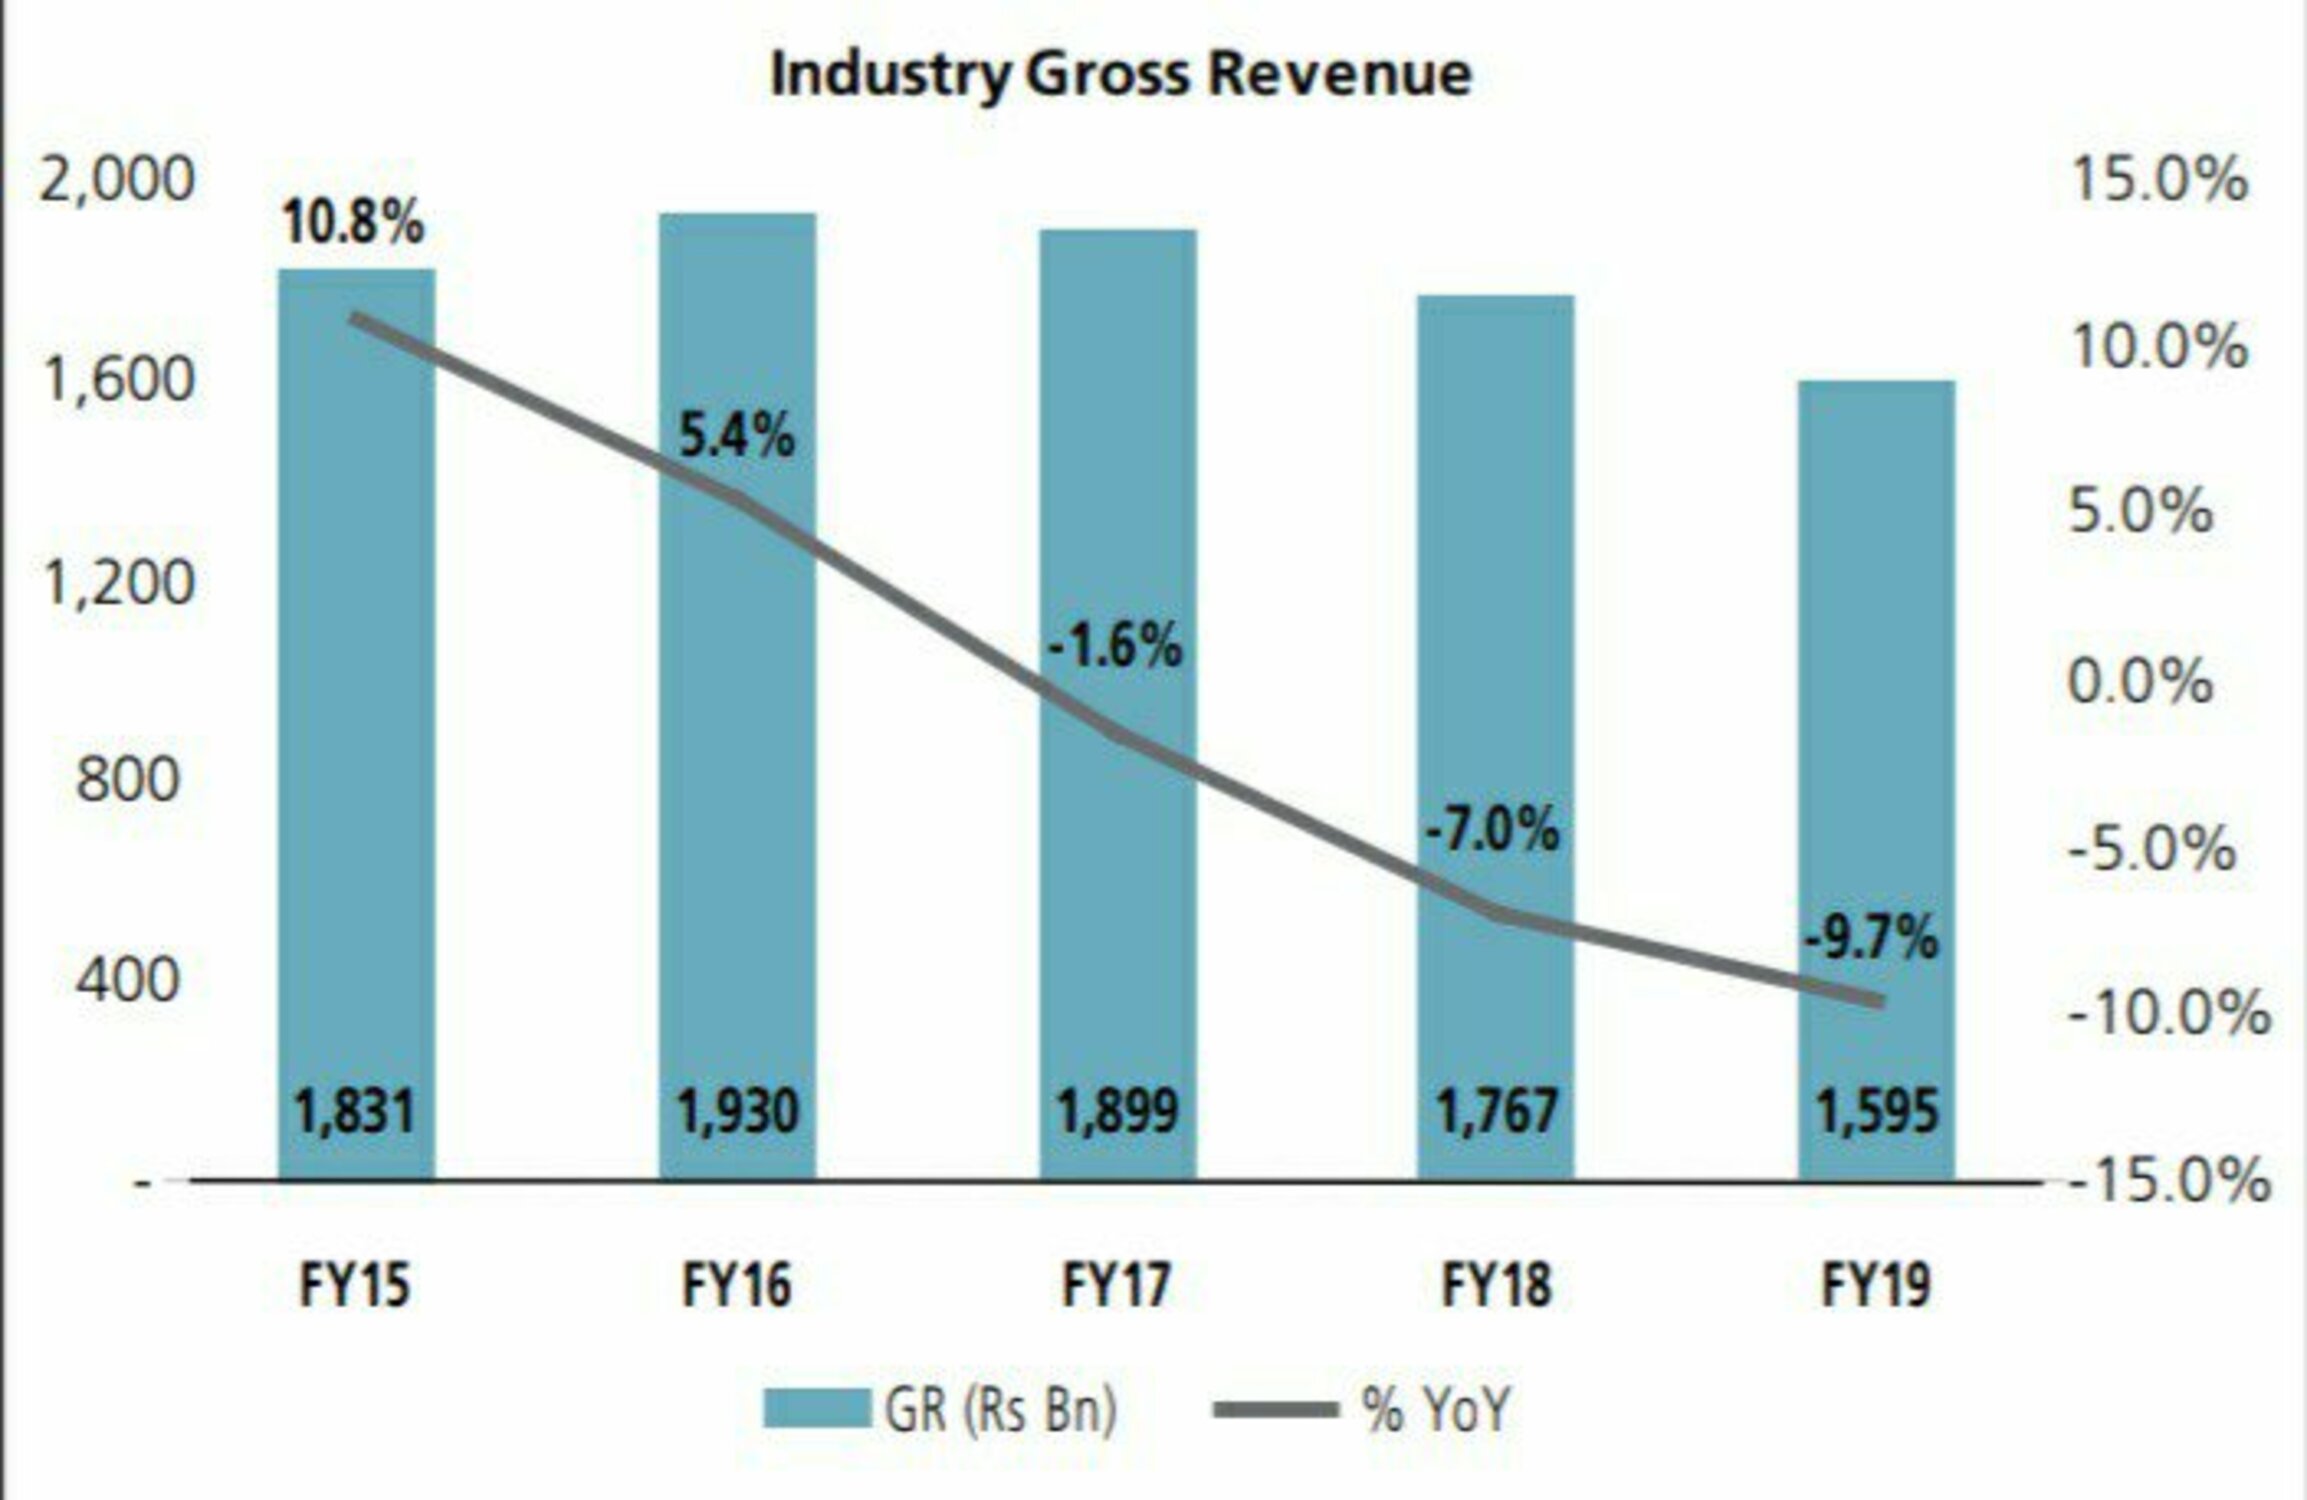 Industry revenue on decline